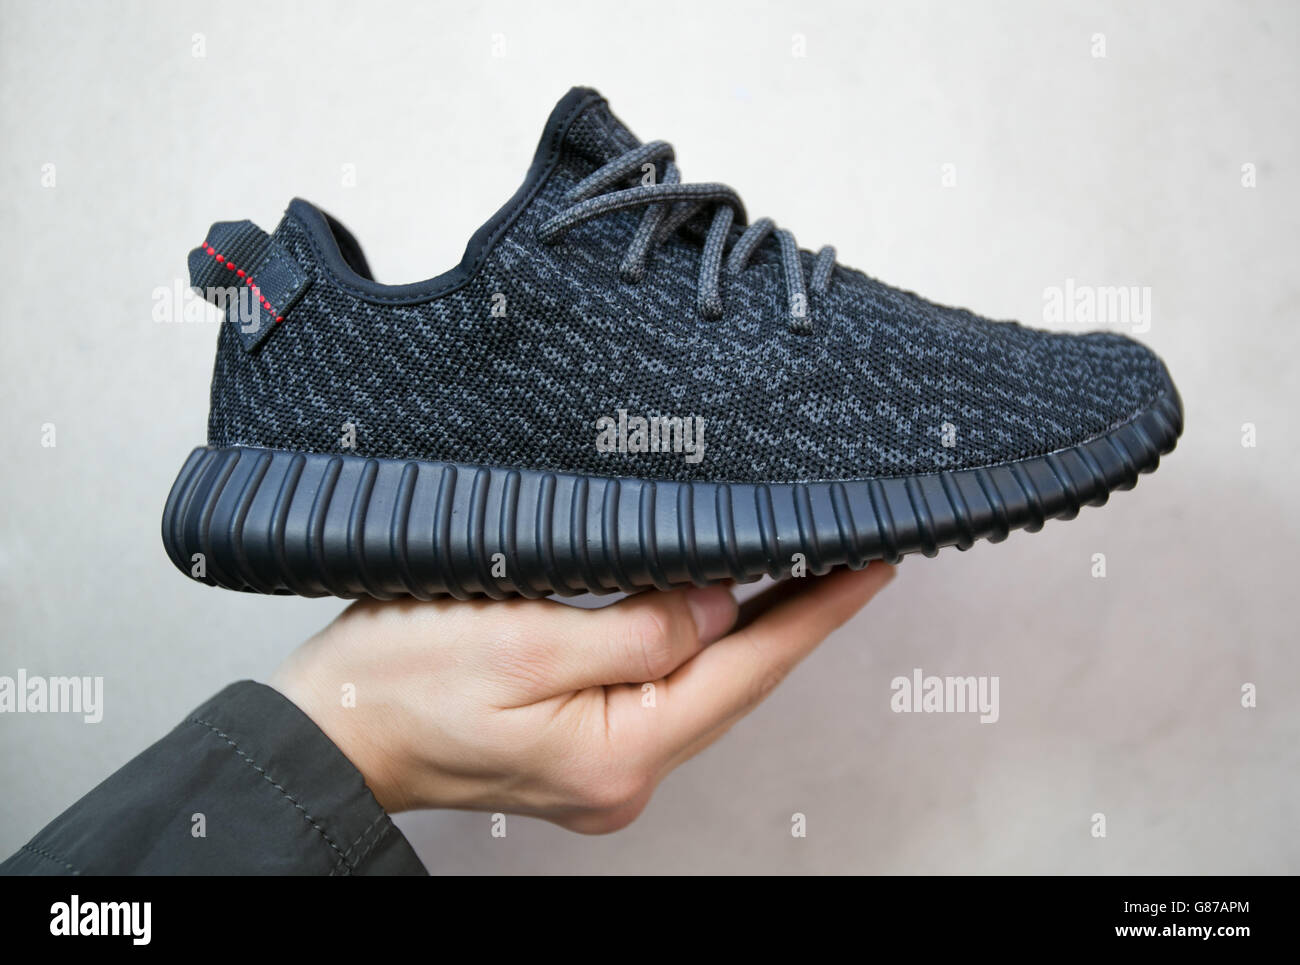 Sultan Est, Bought A Pair Of Limited Addition Adidas Yeezy Boost 350  Trainers, Designed By Musician Kanye West, At Foot Locker In Oxford Street,  London Stock Photo Alamy | wikingerparts.de